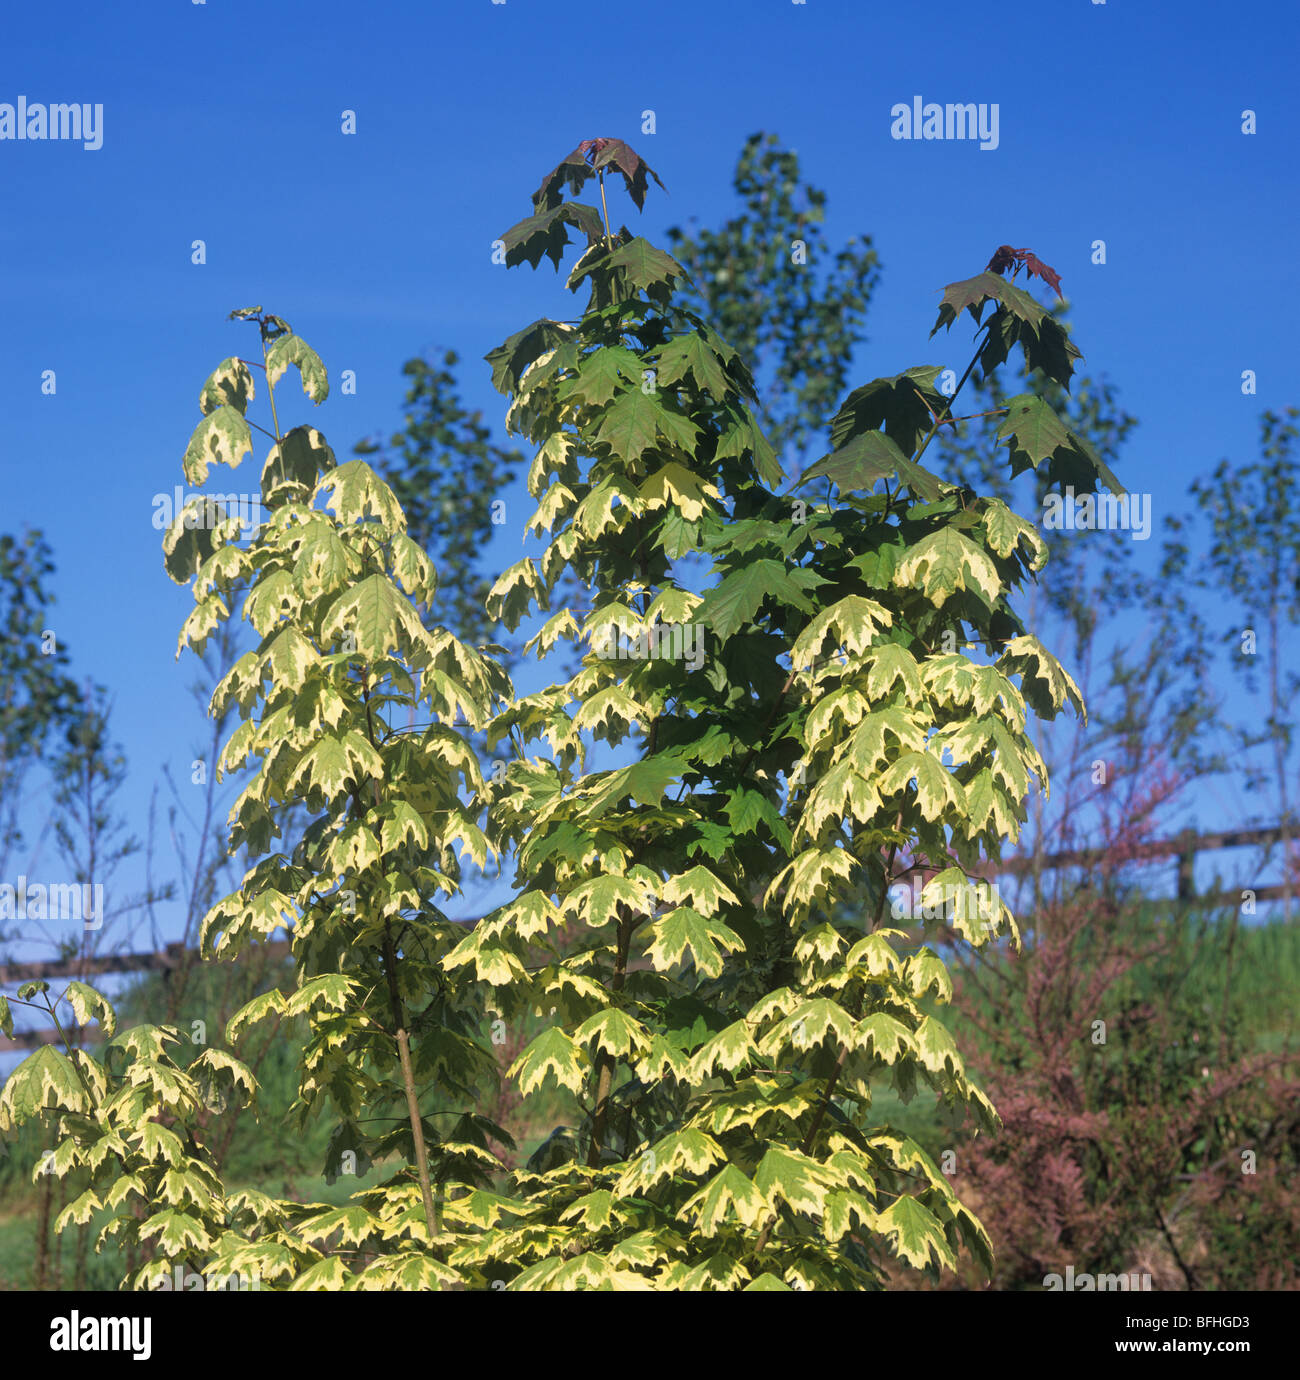 Variegated leaves reverting to all green foliage on Acer drummondii Stock Photo